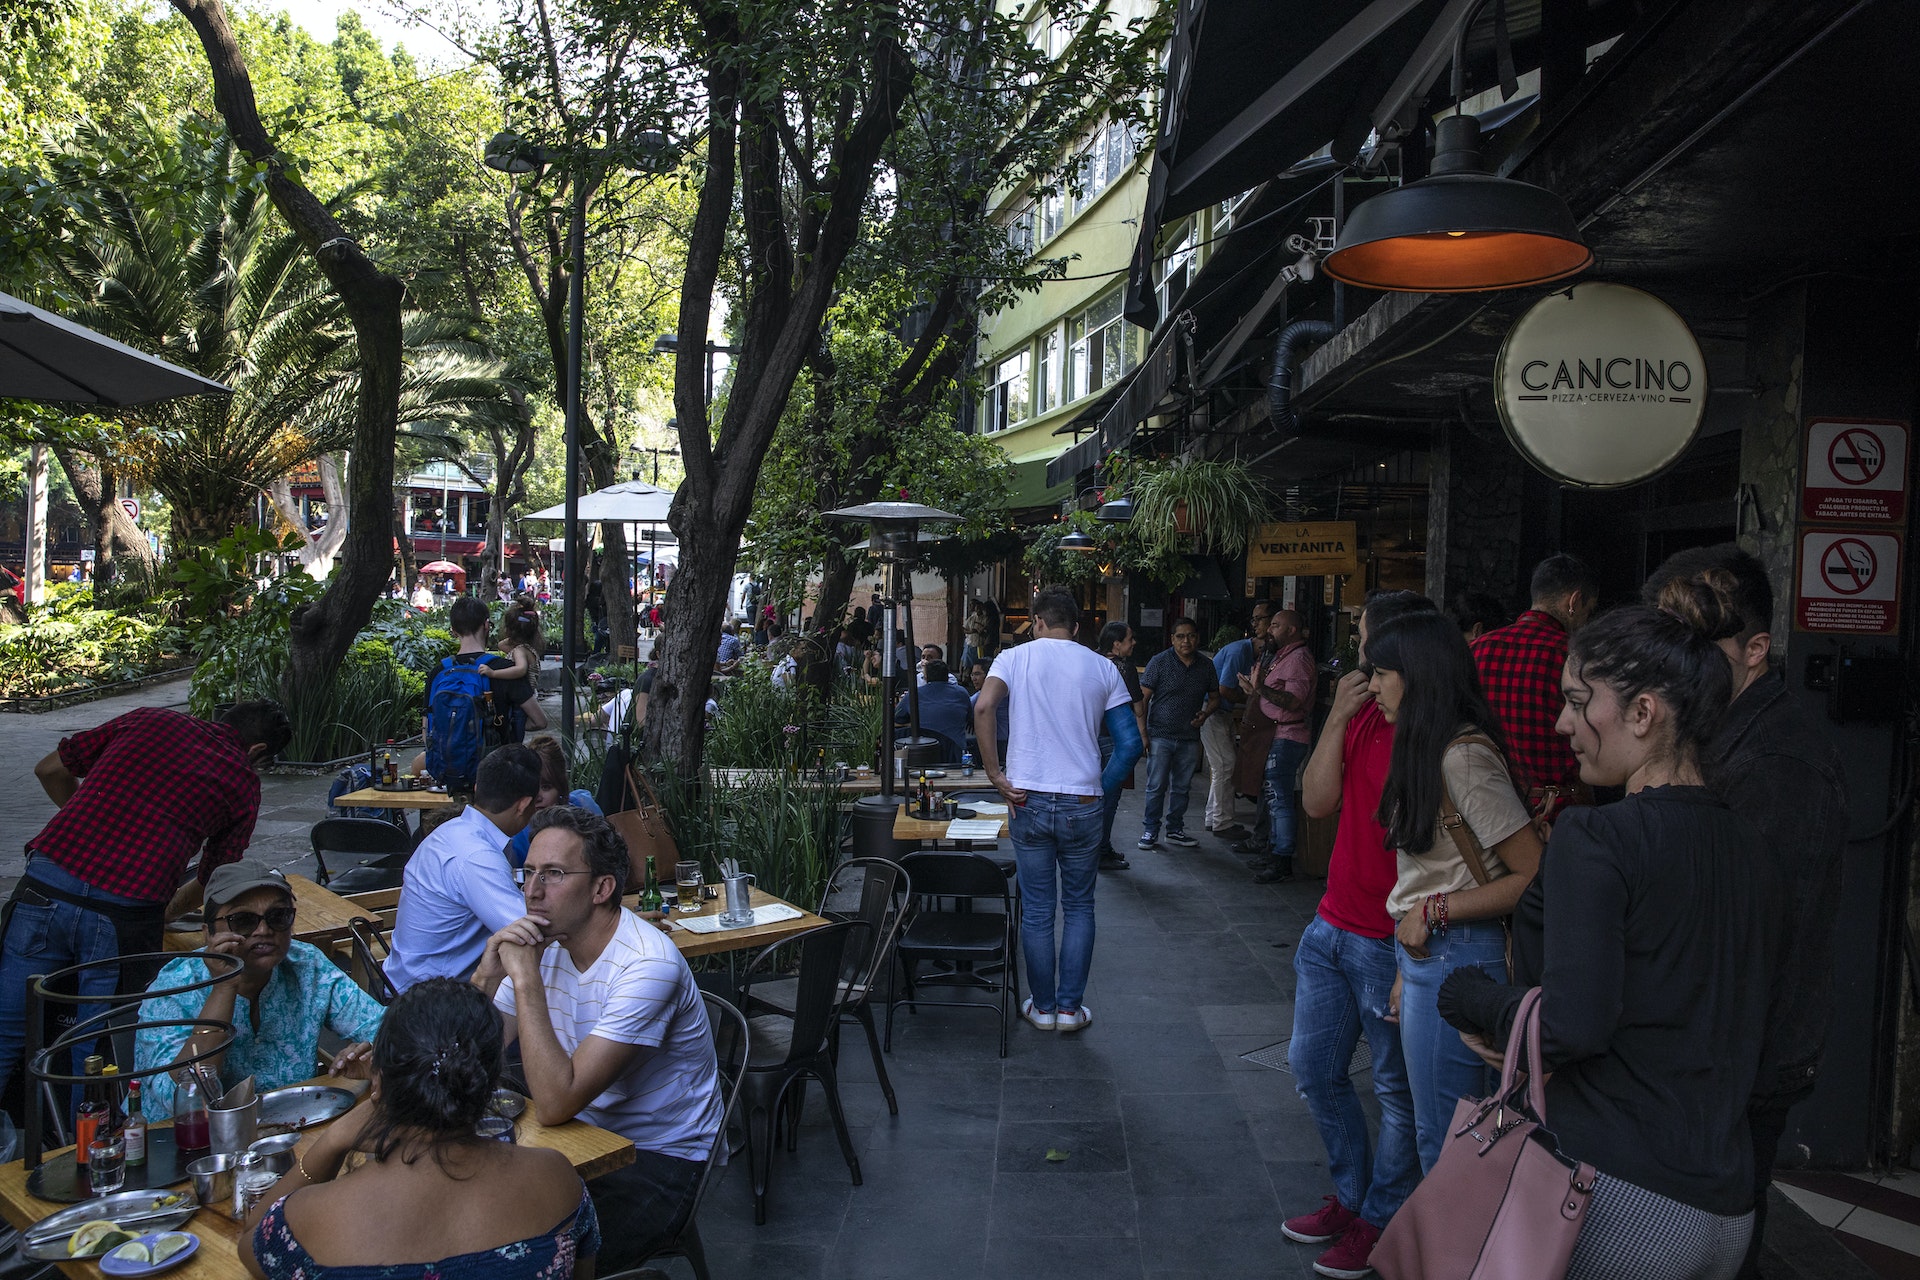 Roma neighborhood is hip and trendy with all kinds of restaurants and bars